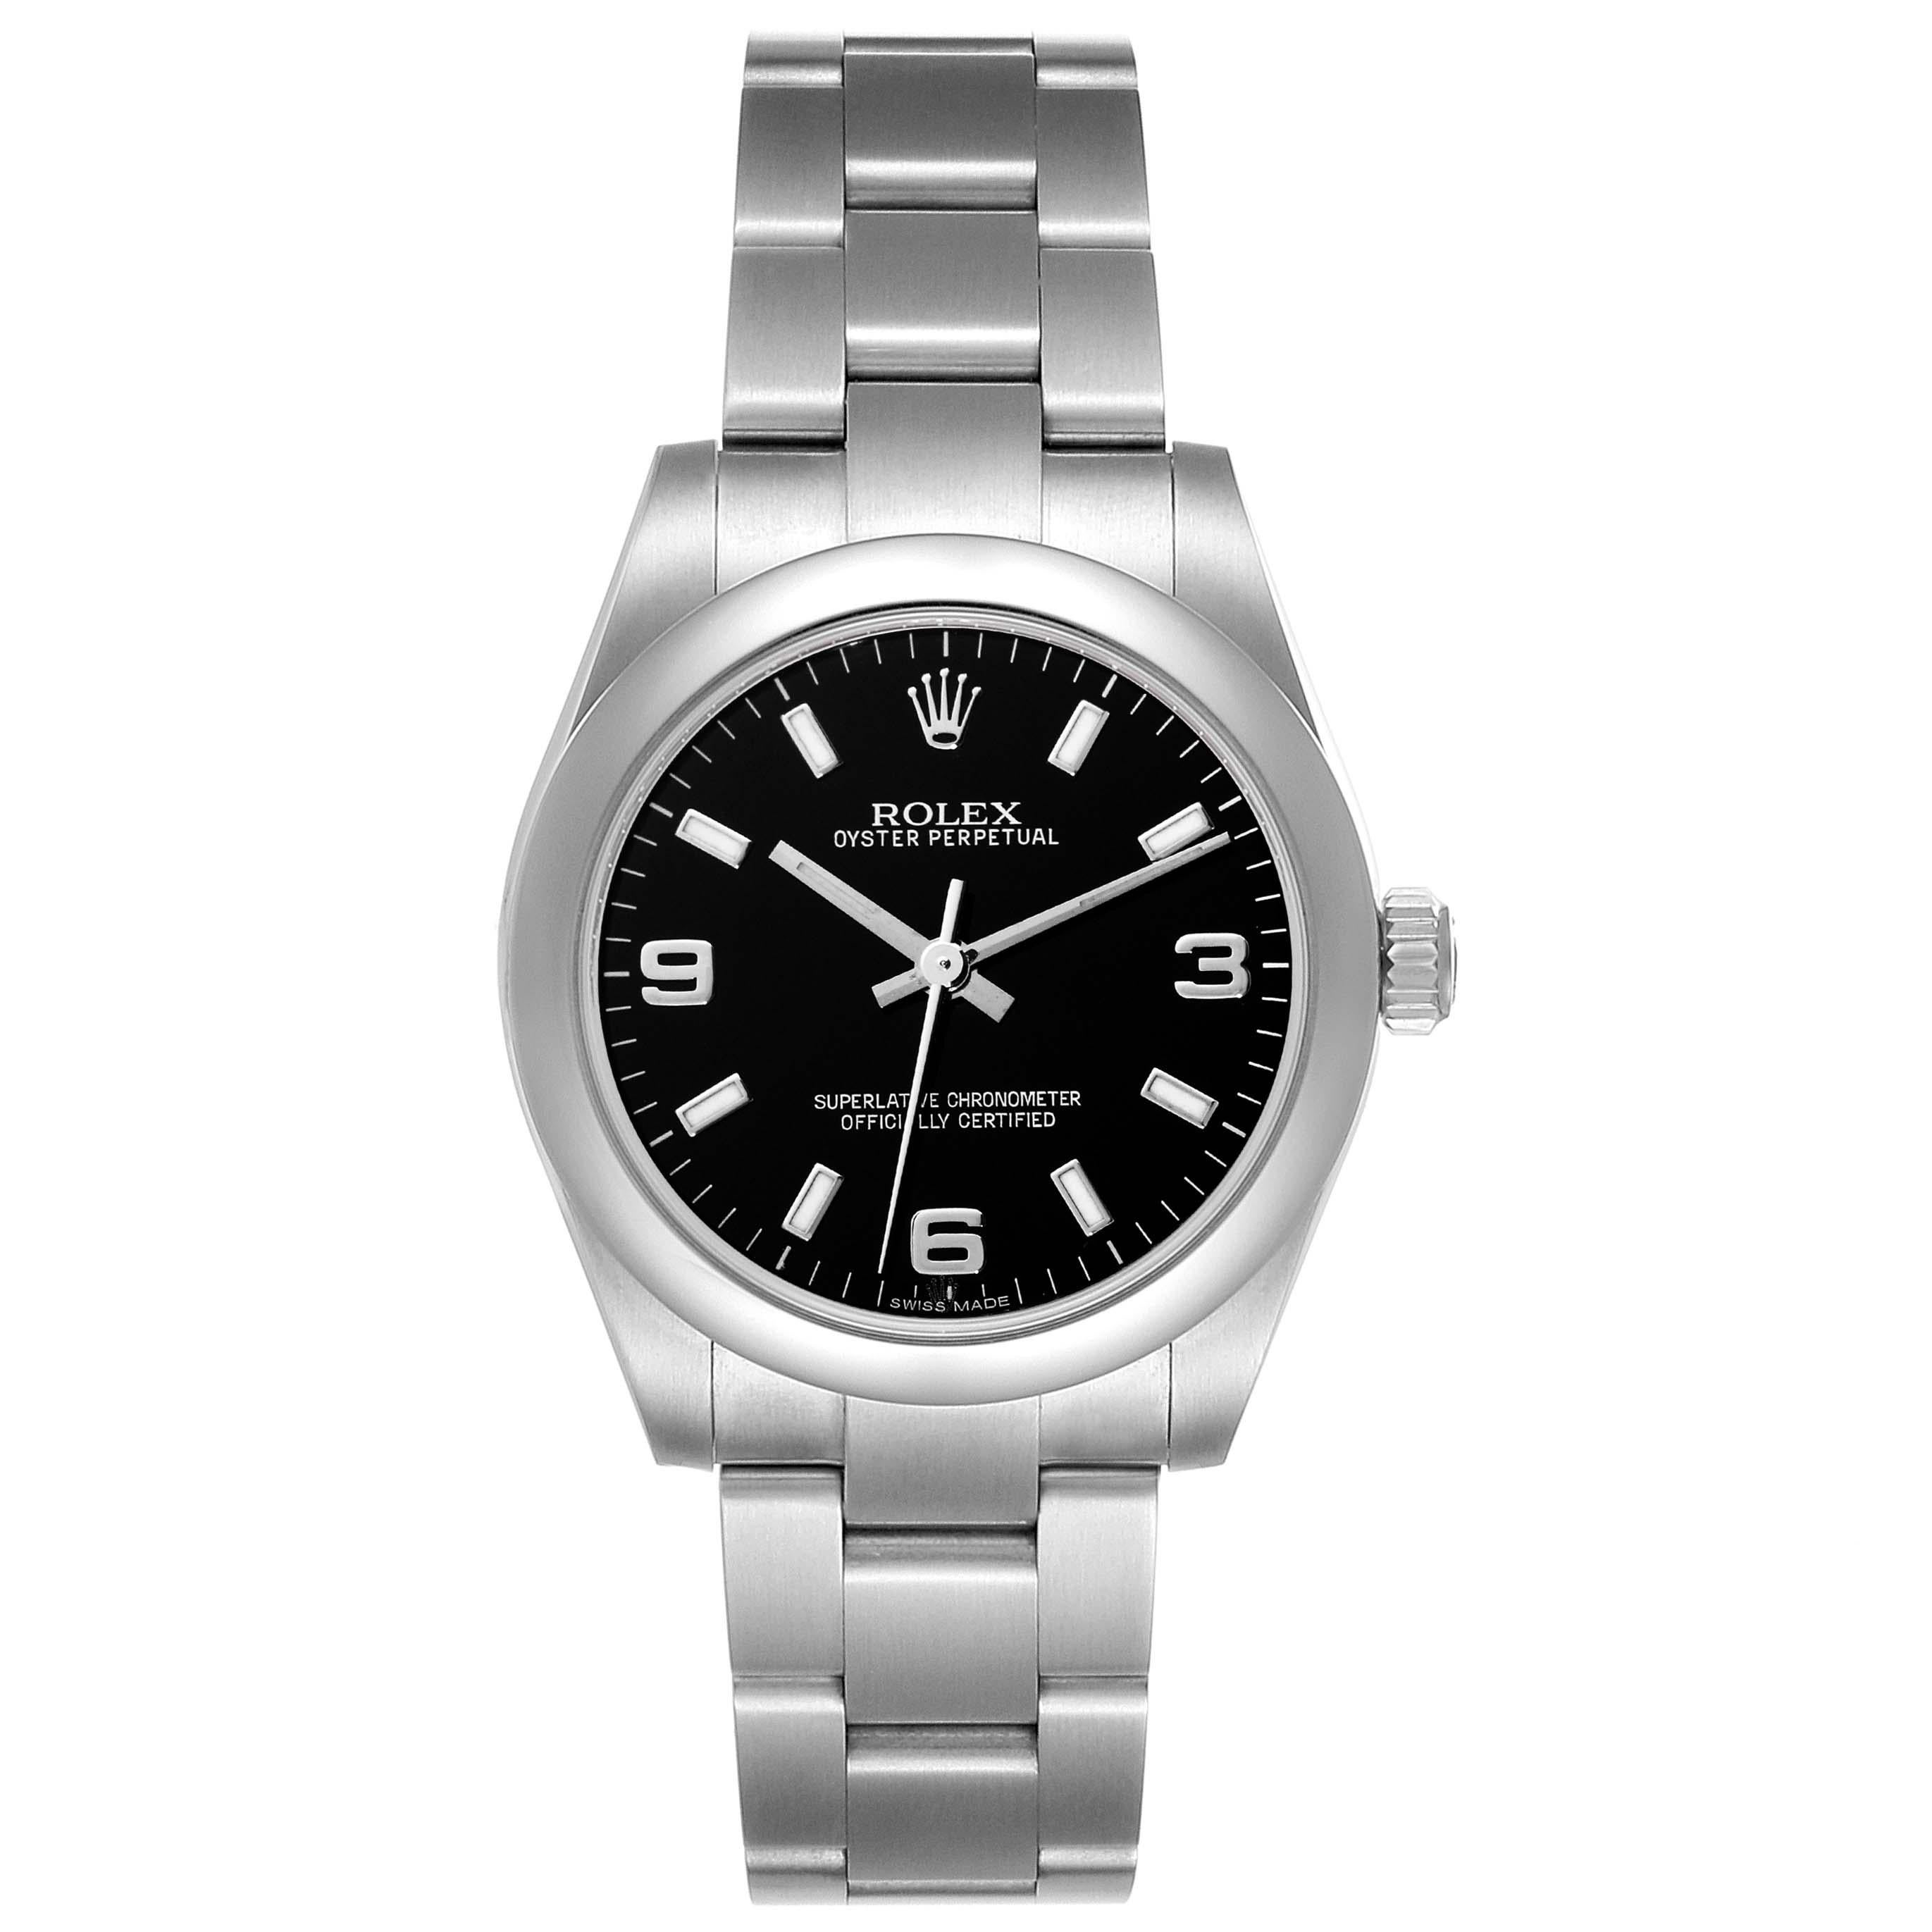 Rolex Midsize Black Dial Domed Bezel Steel Ladies Watch 177200. Officially certified chronometer self-winding movement with quickset date function. Stainless steel oyster case 31.0 mm in diameter. Rolex logo on a crown. Stainless steel smooth domed